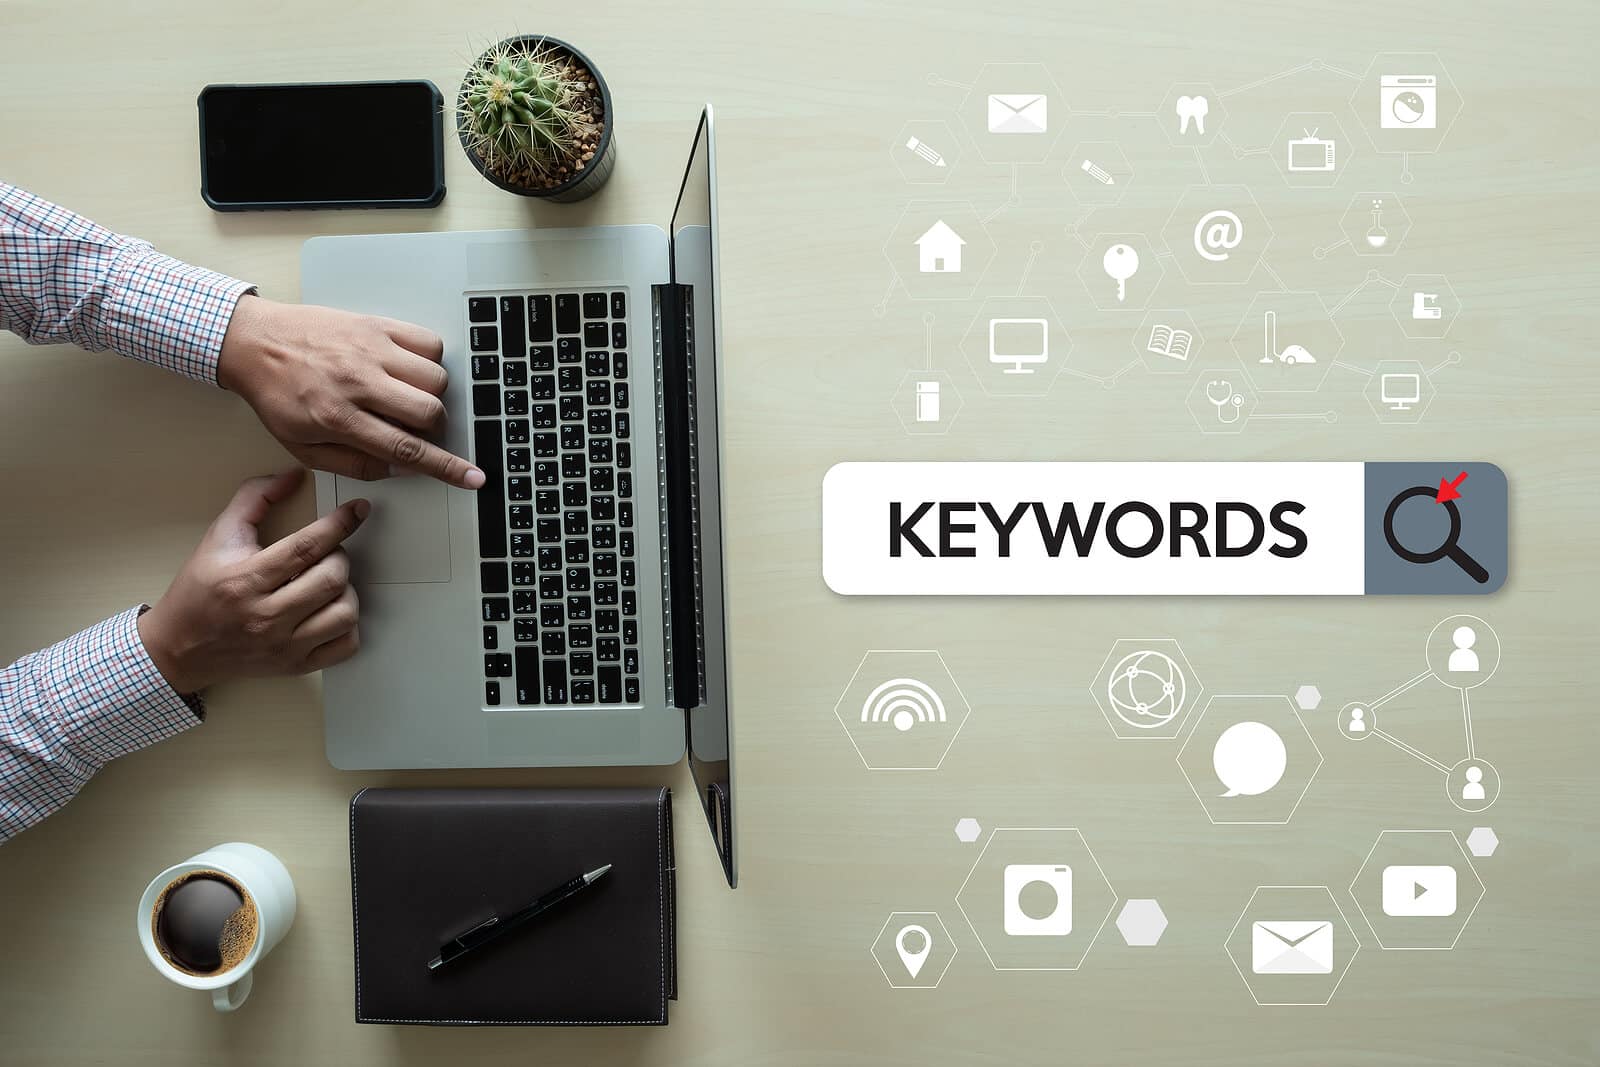 Keywords in search bar while a person types on a computer. Keywords are an important factor for personal injury SEO. Learn more SEO techniques for your law firm.